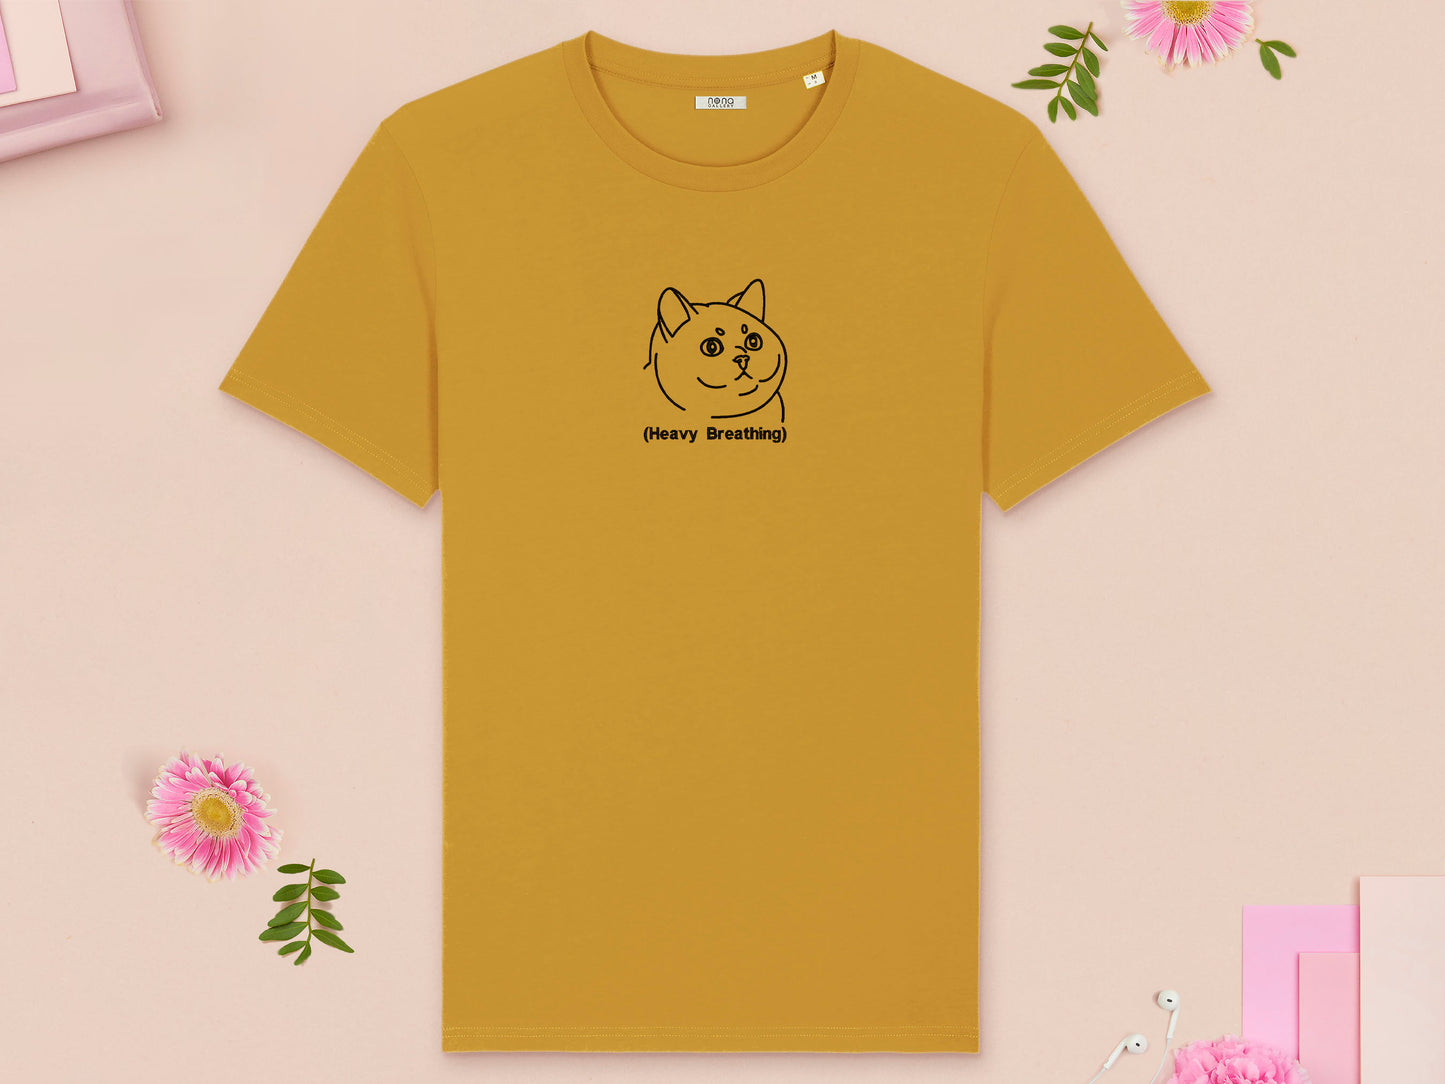 A yellow crew neck short sleeve t-shirt, with an embroidered black thread design of cute fat cat portrait with text underneath saying (Heavy Breathing)